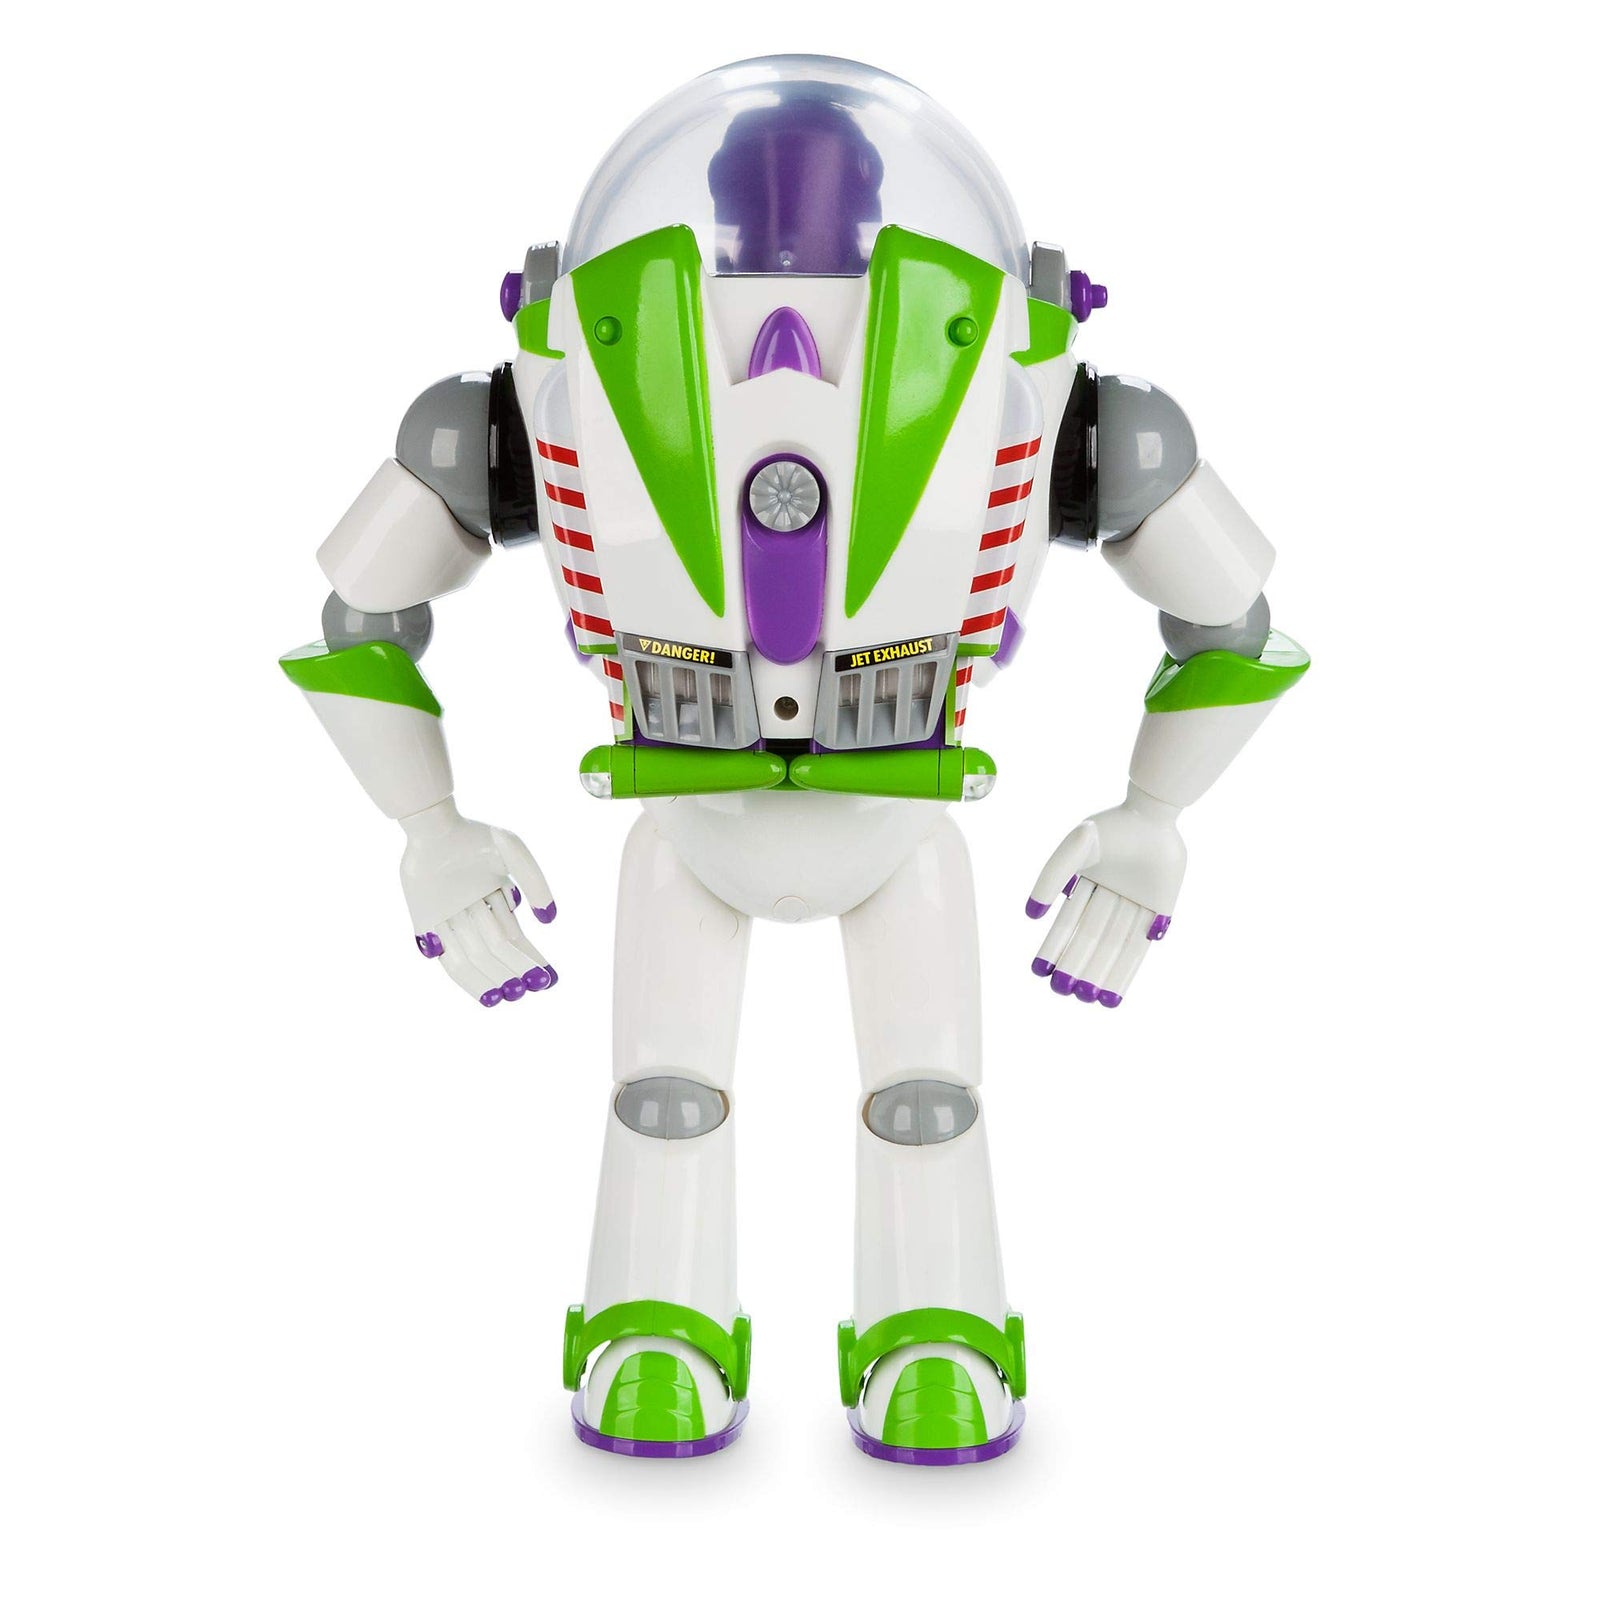 Disney Buzz Lightyear Interactive Talking Action Figure - 12 Inches